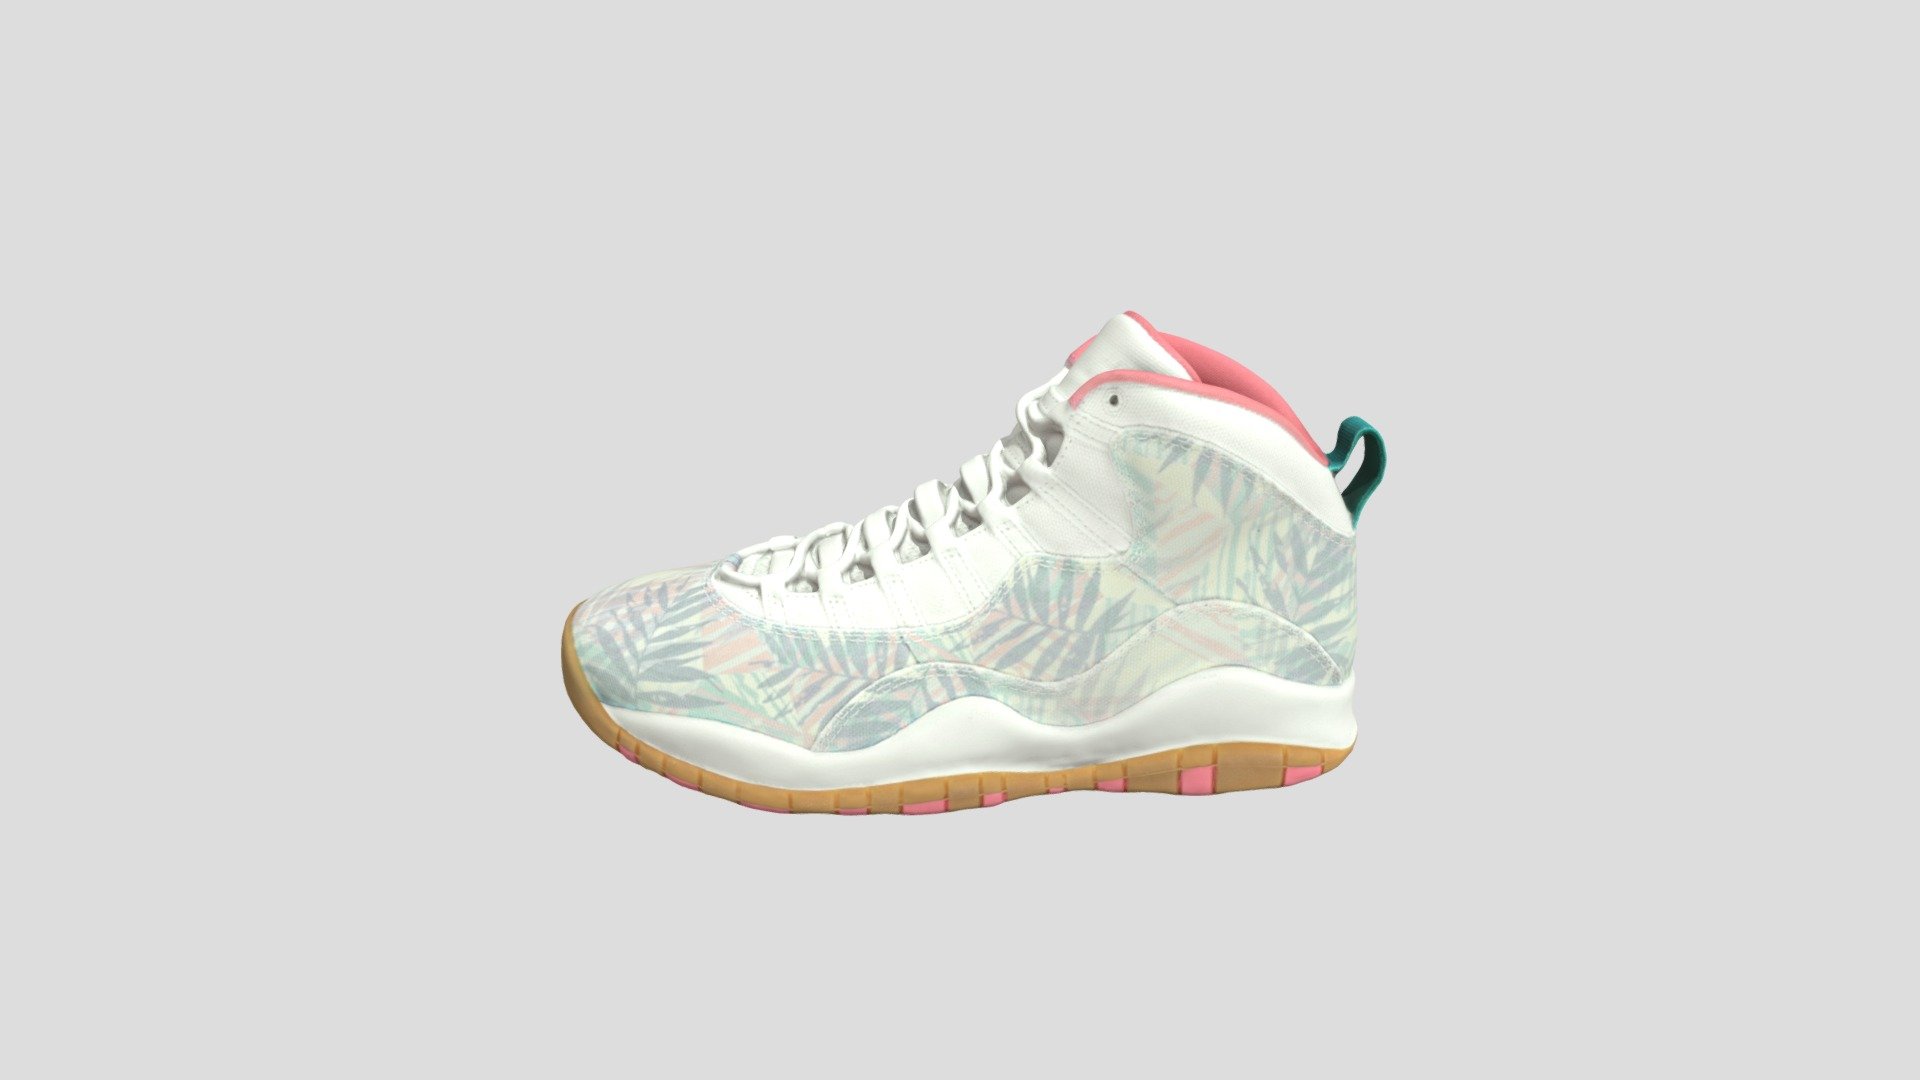 This model was created firstly by 3D scanning on retail version, and then being detail-improved manually, thus a 1:1 repulica of the original
PBR ready
Low-poly
4K texture
Welcome to check out other models we have to offer. And we do accept custom orders as well :) - Super Bowl LIV x Air Jordan 10 南海岸_CV9776-900 - Buy Royalty Free 3D model by TRARGUS 3d model